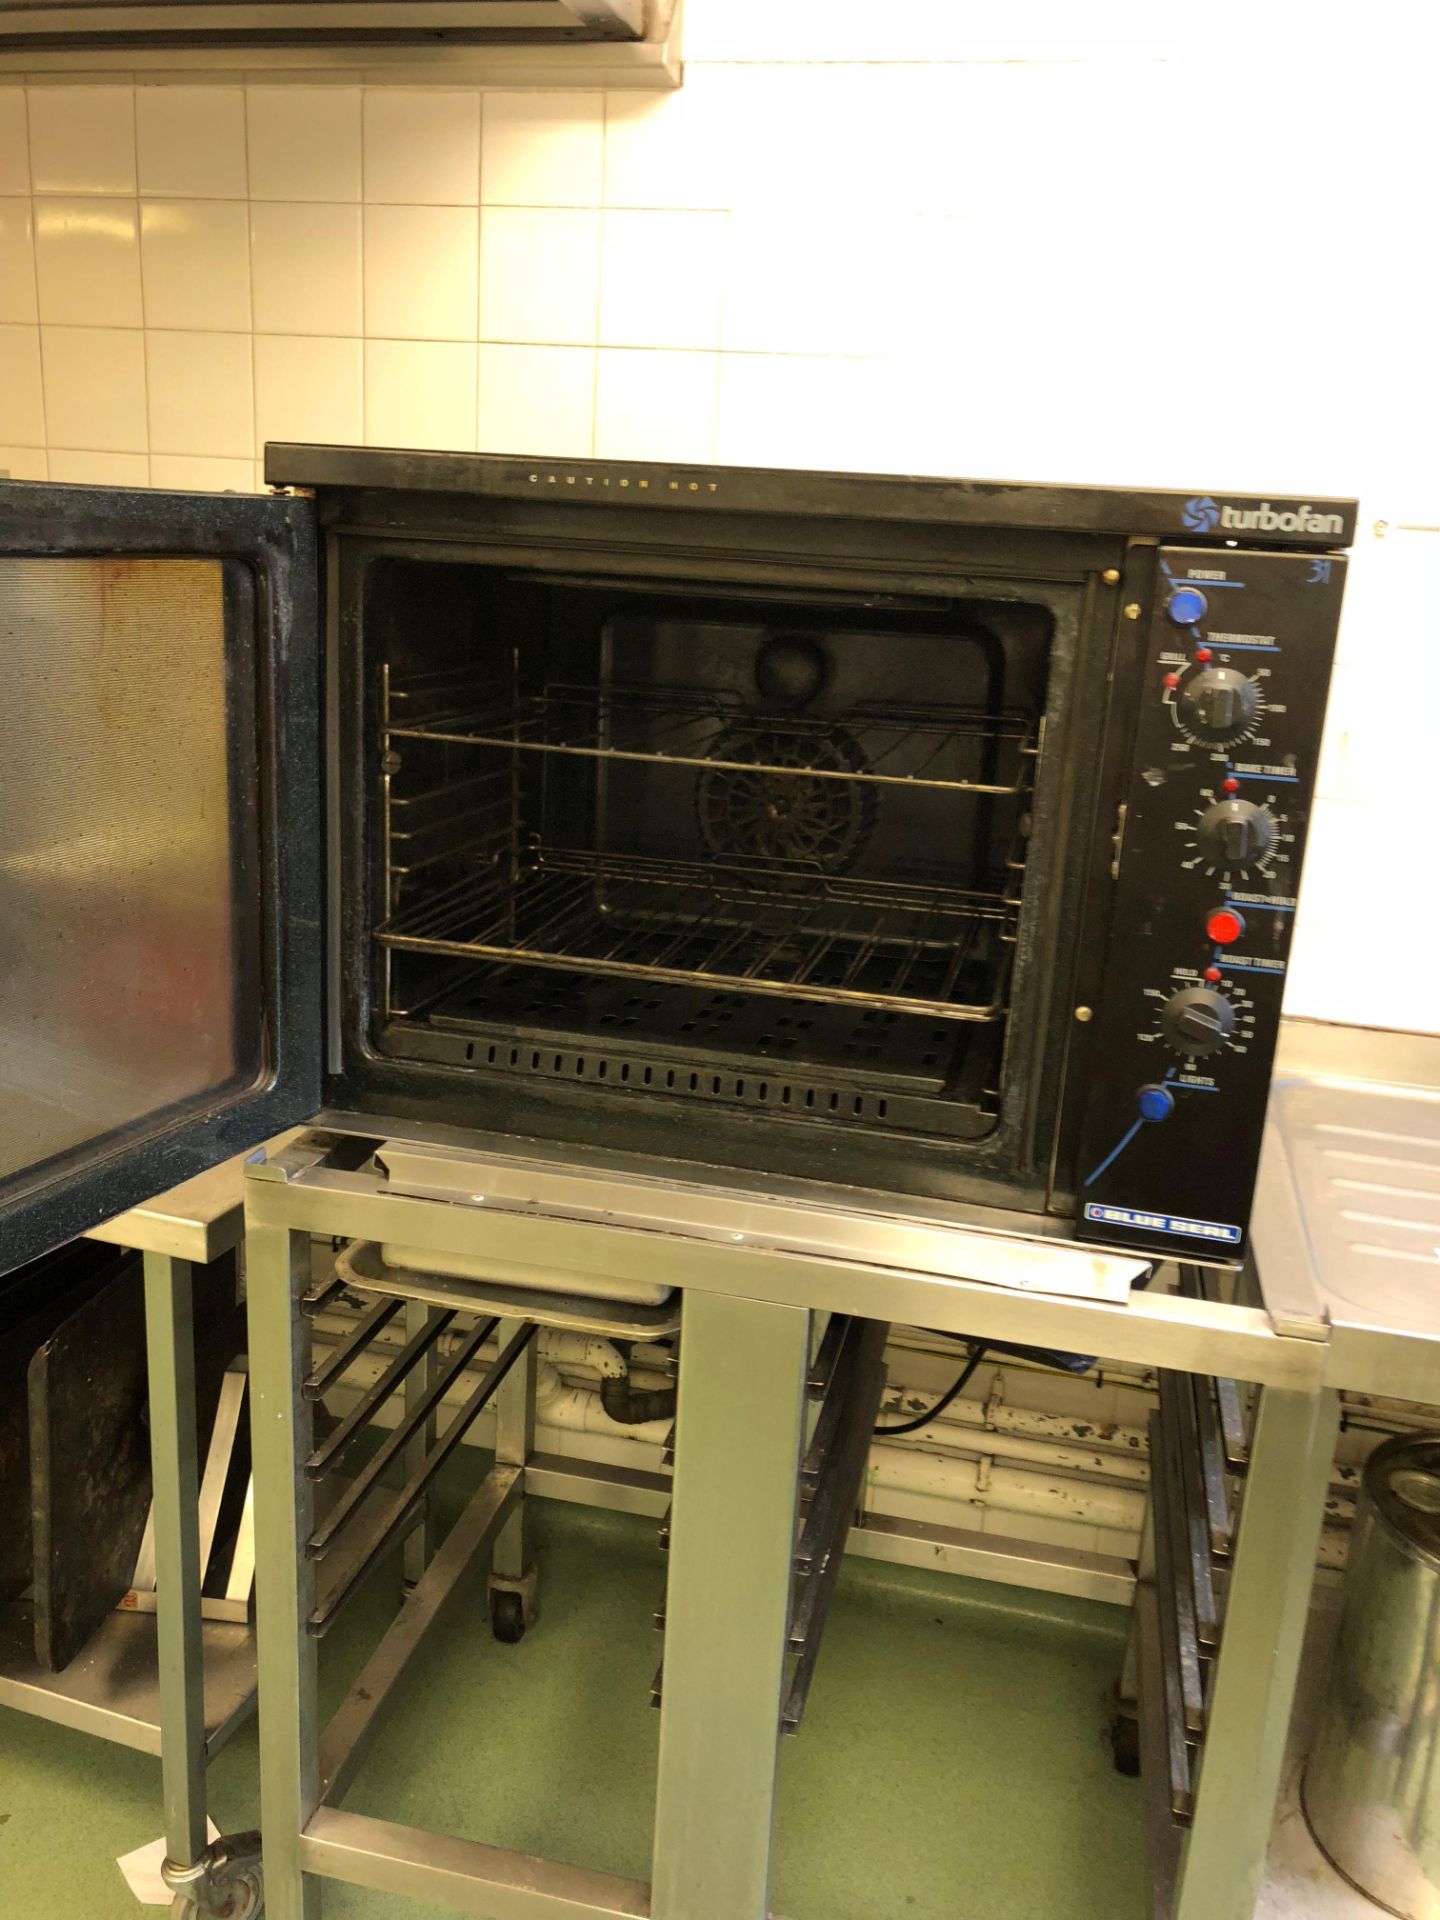 Blue Seal Oven - Image 3 of 3